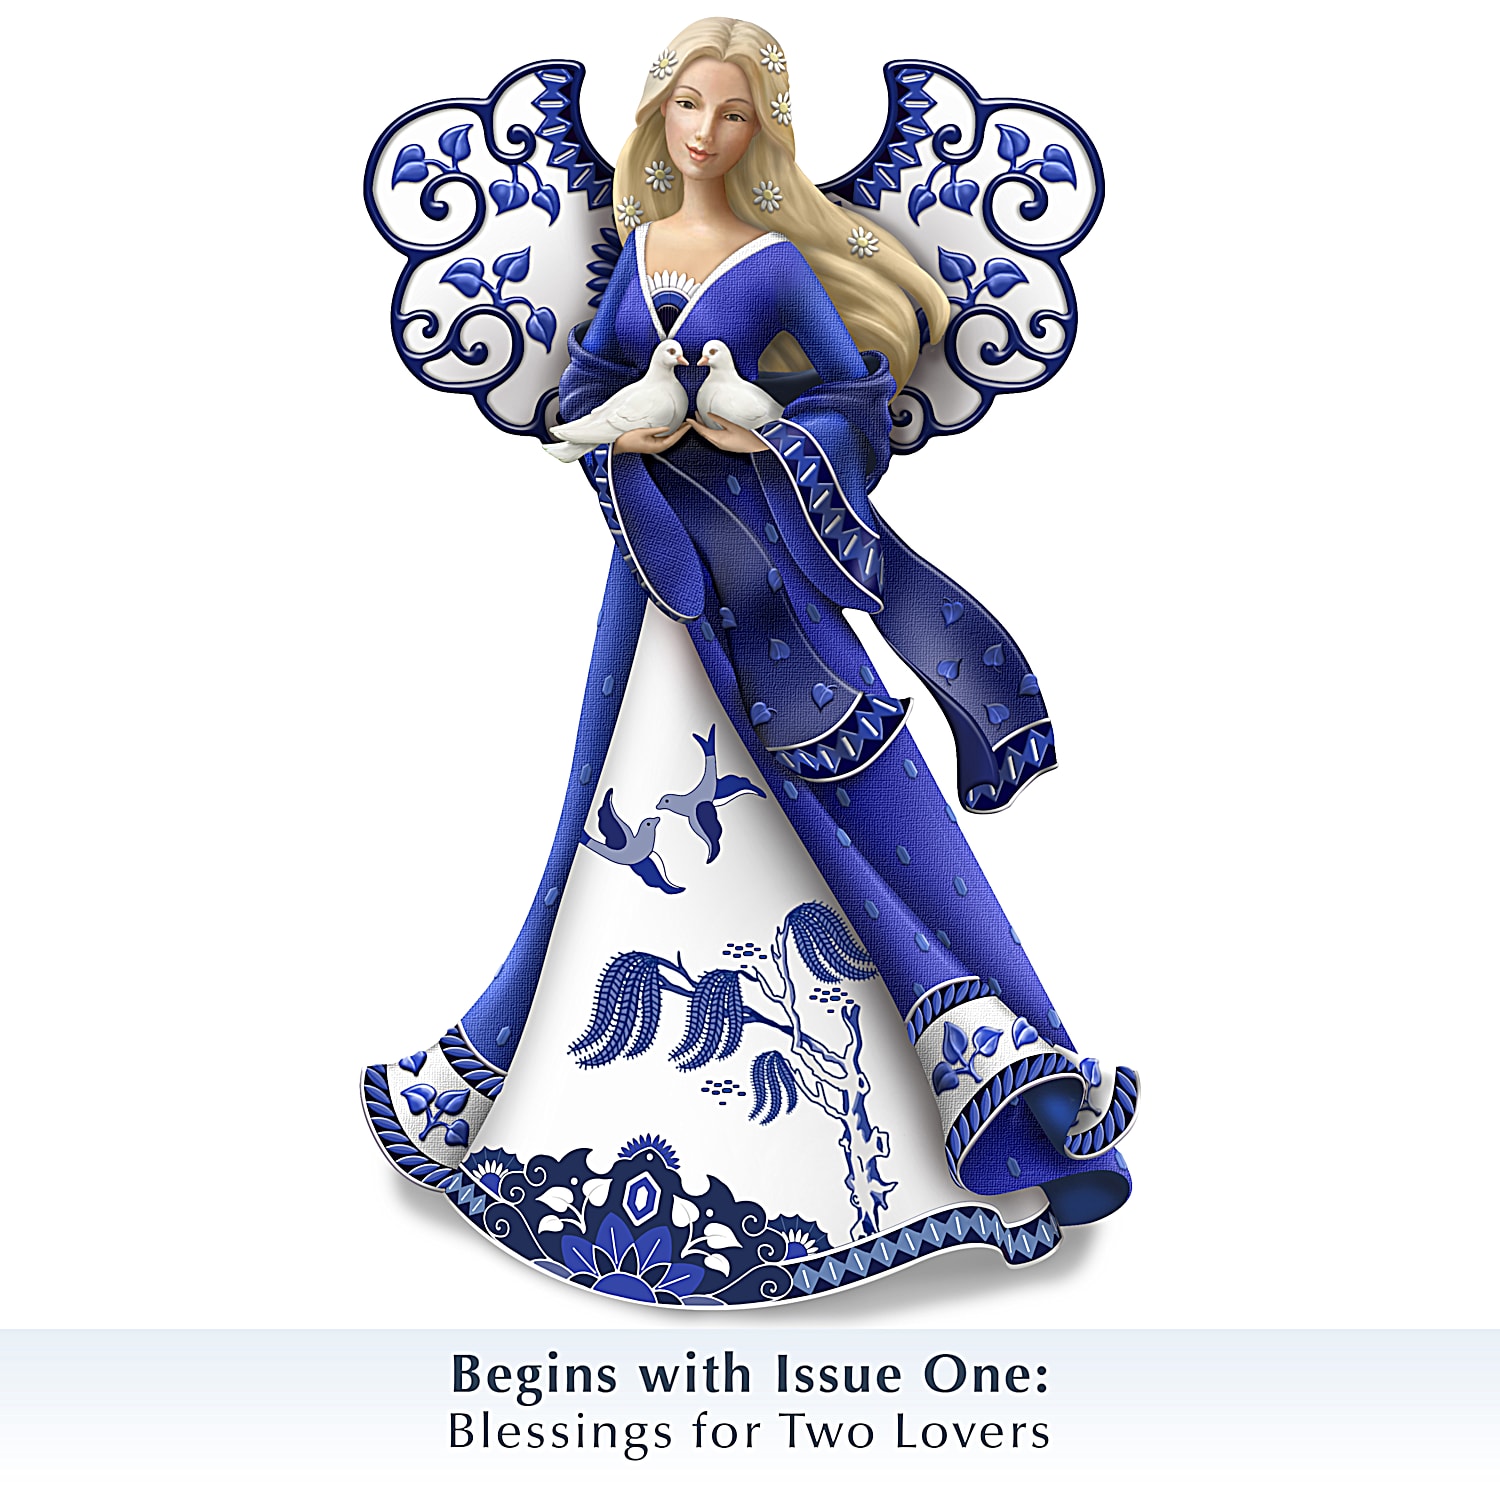 The Angelic Beauties Of Blue Willow Figurine Collection